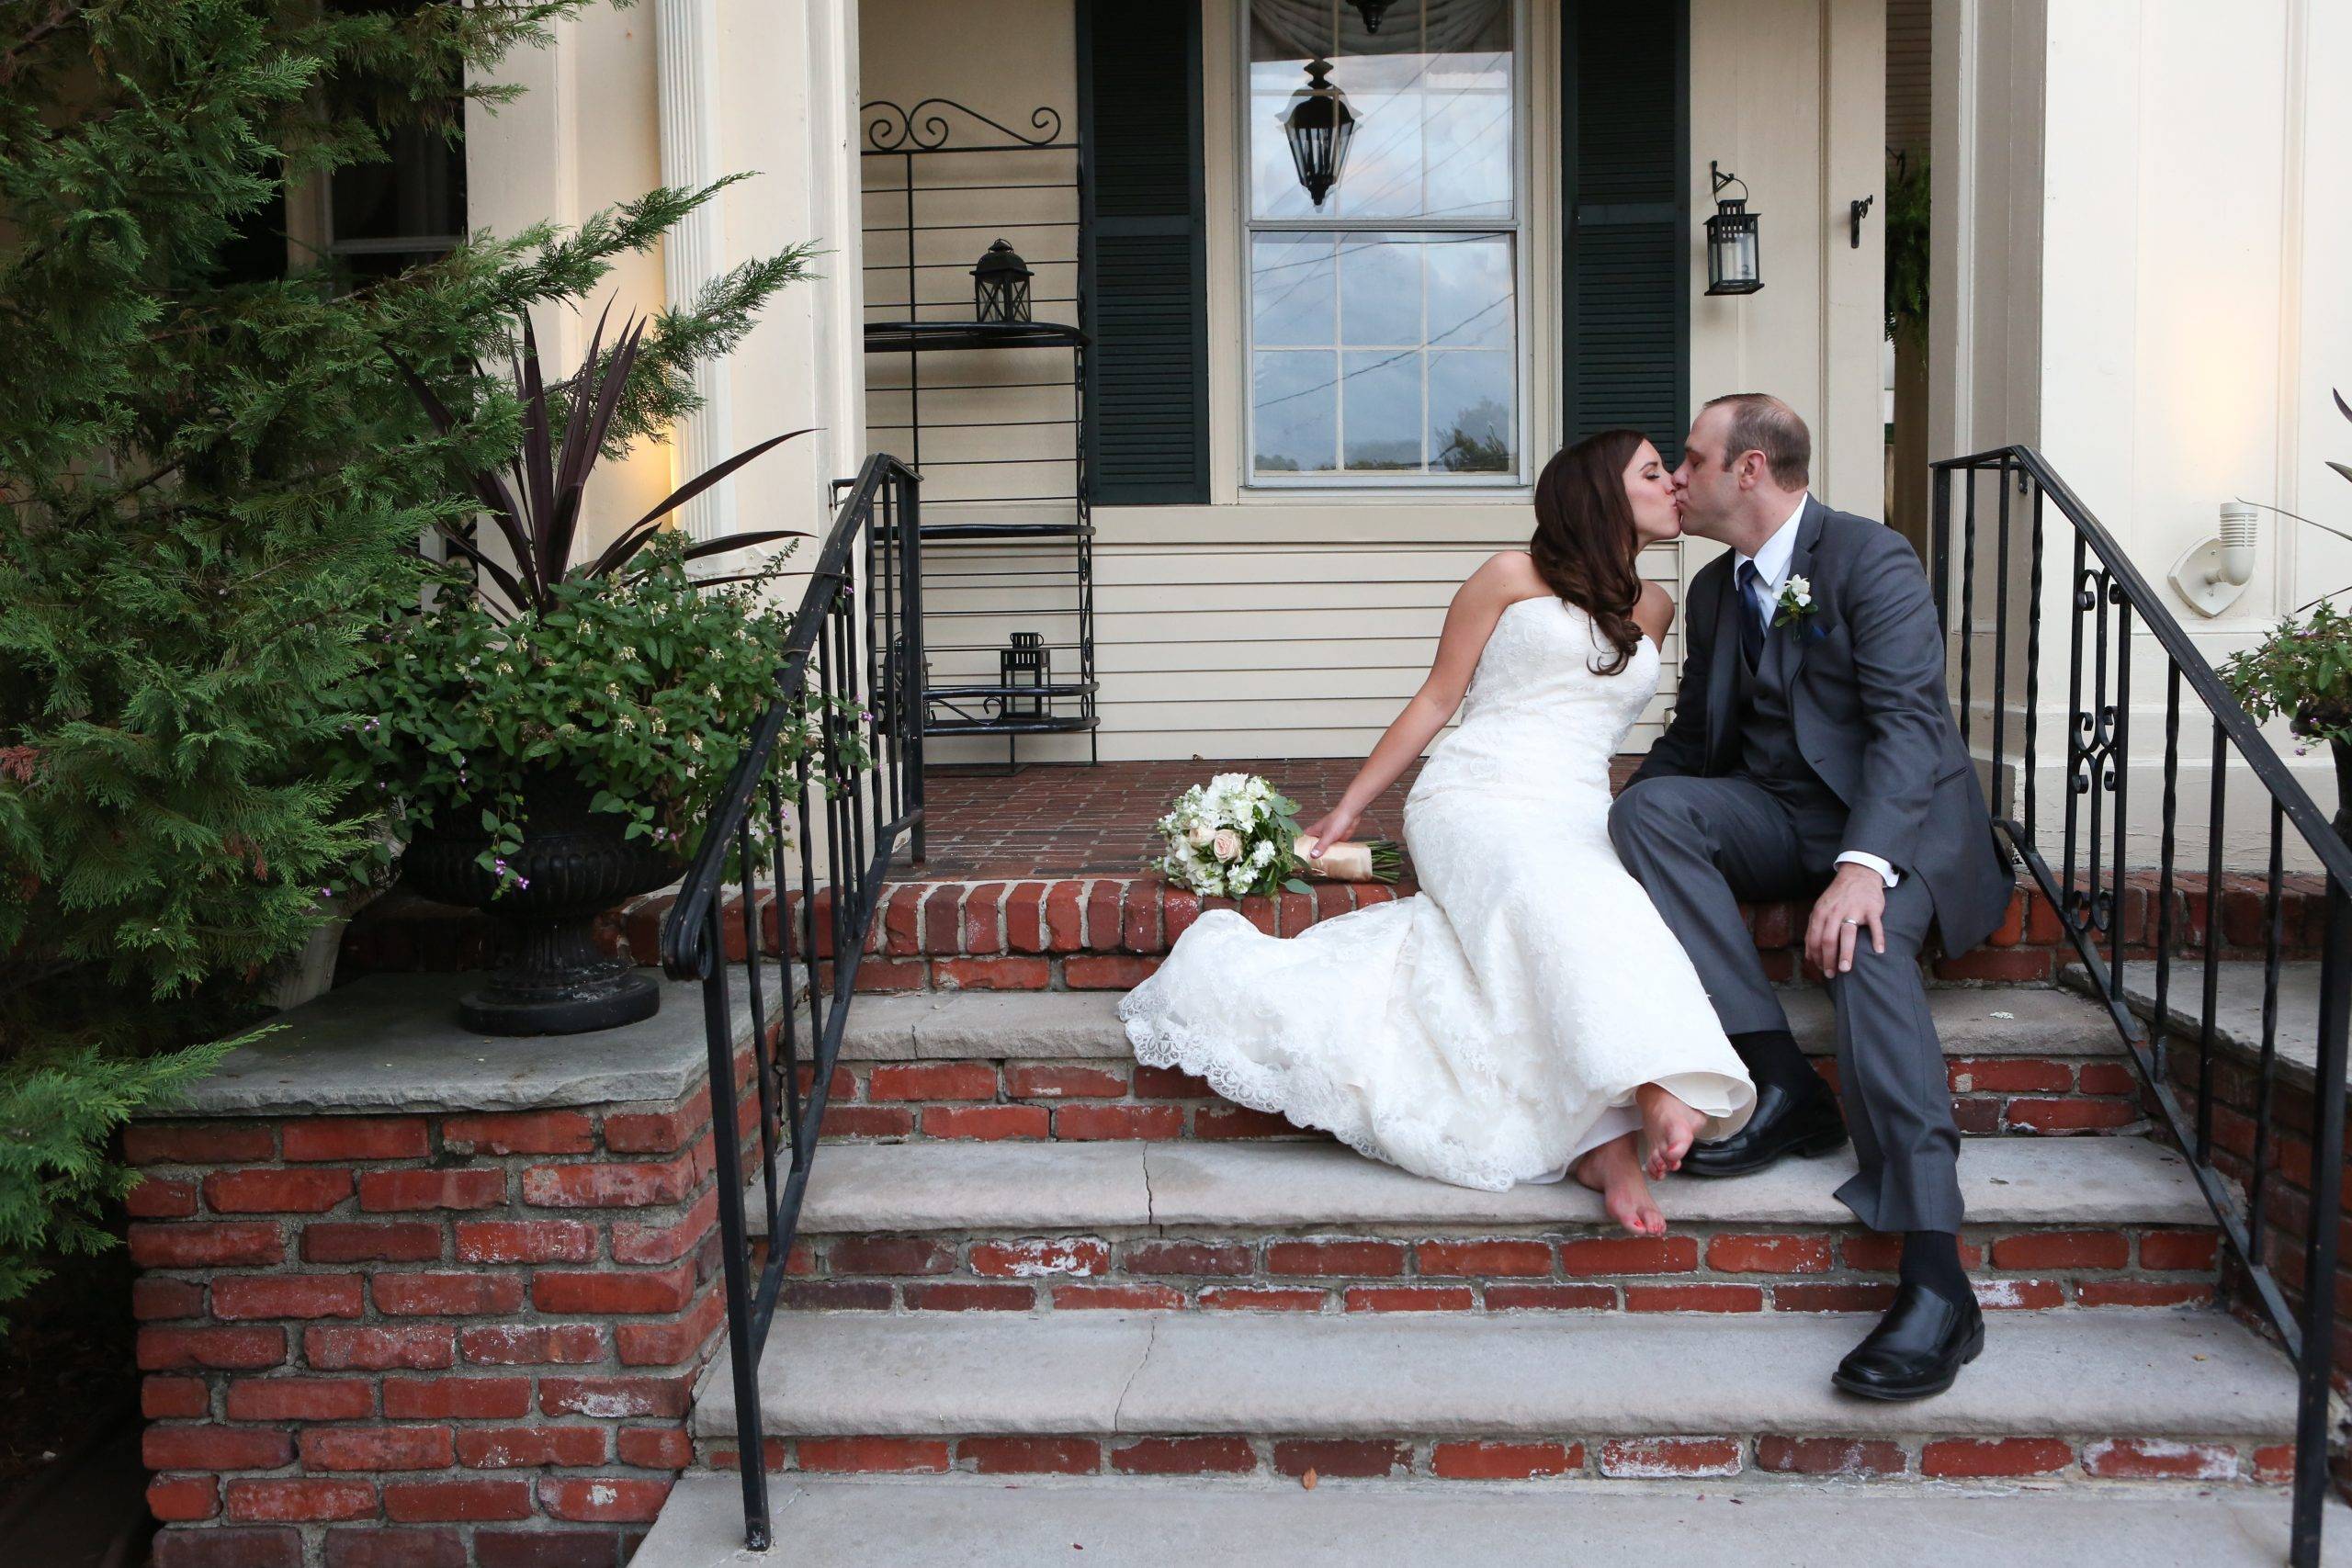 A bride and groom sitting on the steps of a house.